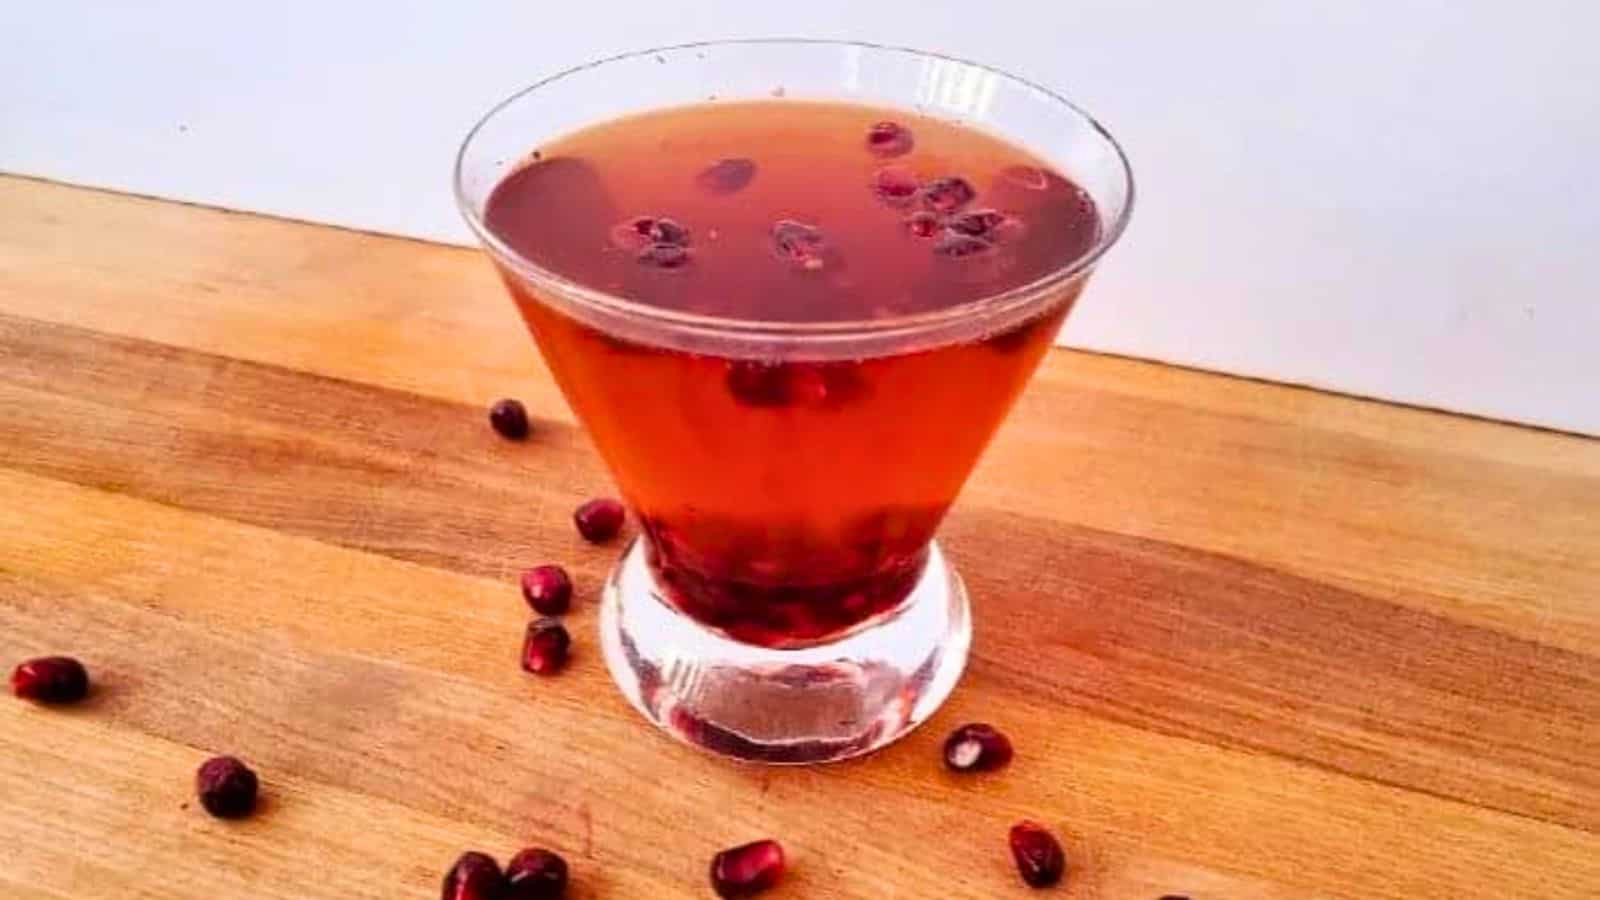 Image shows a martini glass with a Pomegranate Fizz Cocktail and pomegranate arils around it.